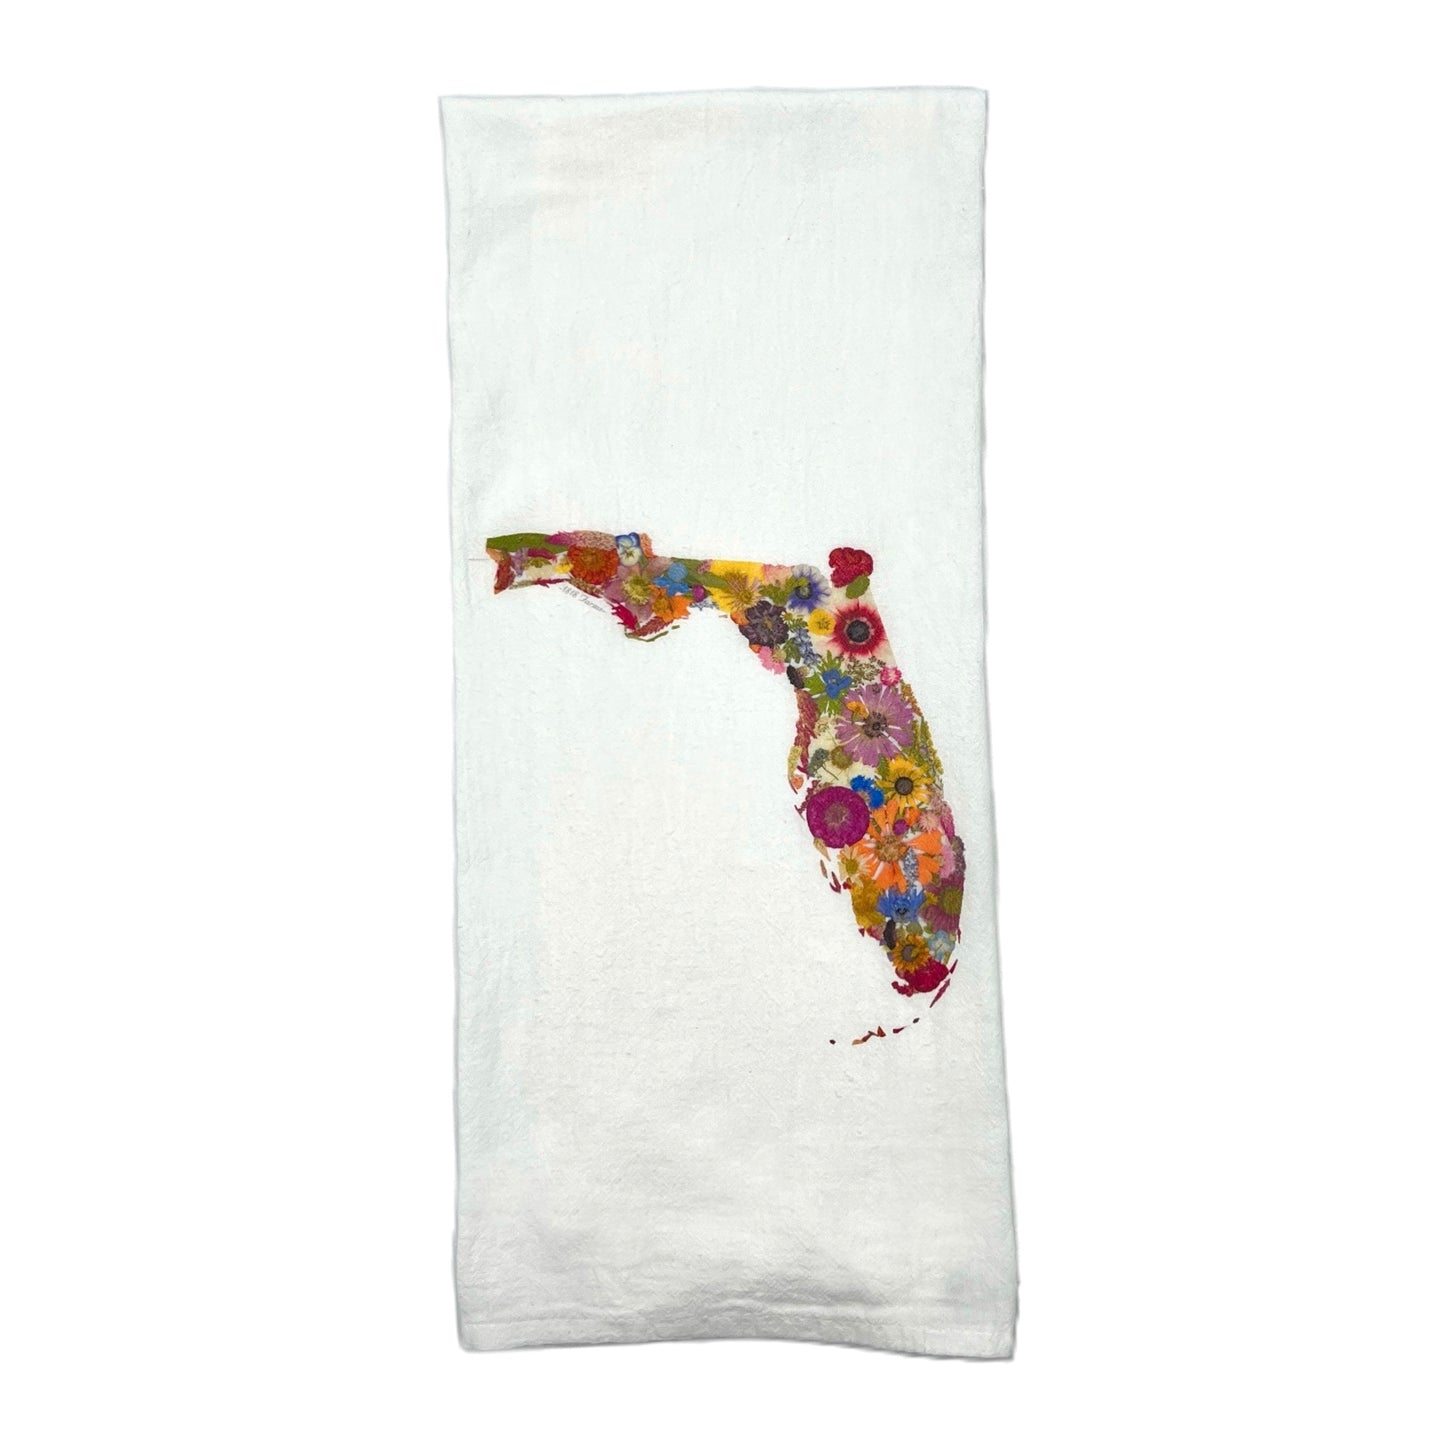 State Themed Flour Sack Towel Featuring Dried, Pressed Flowers - "Where I Bloom" Collection Towel 1818 Farms Florida  